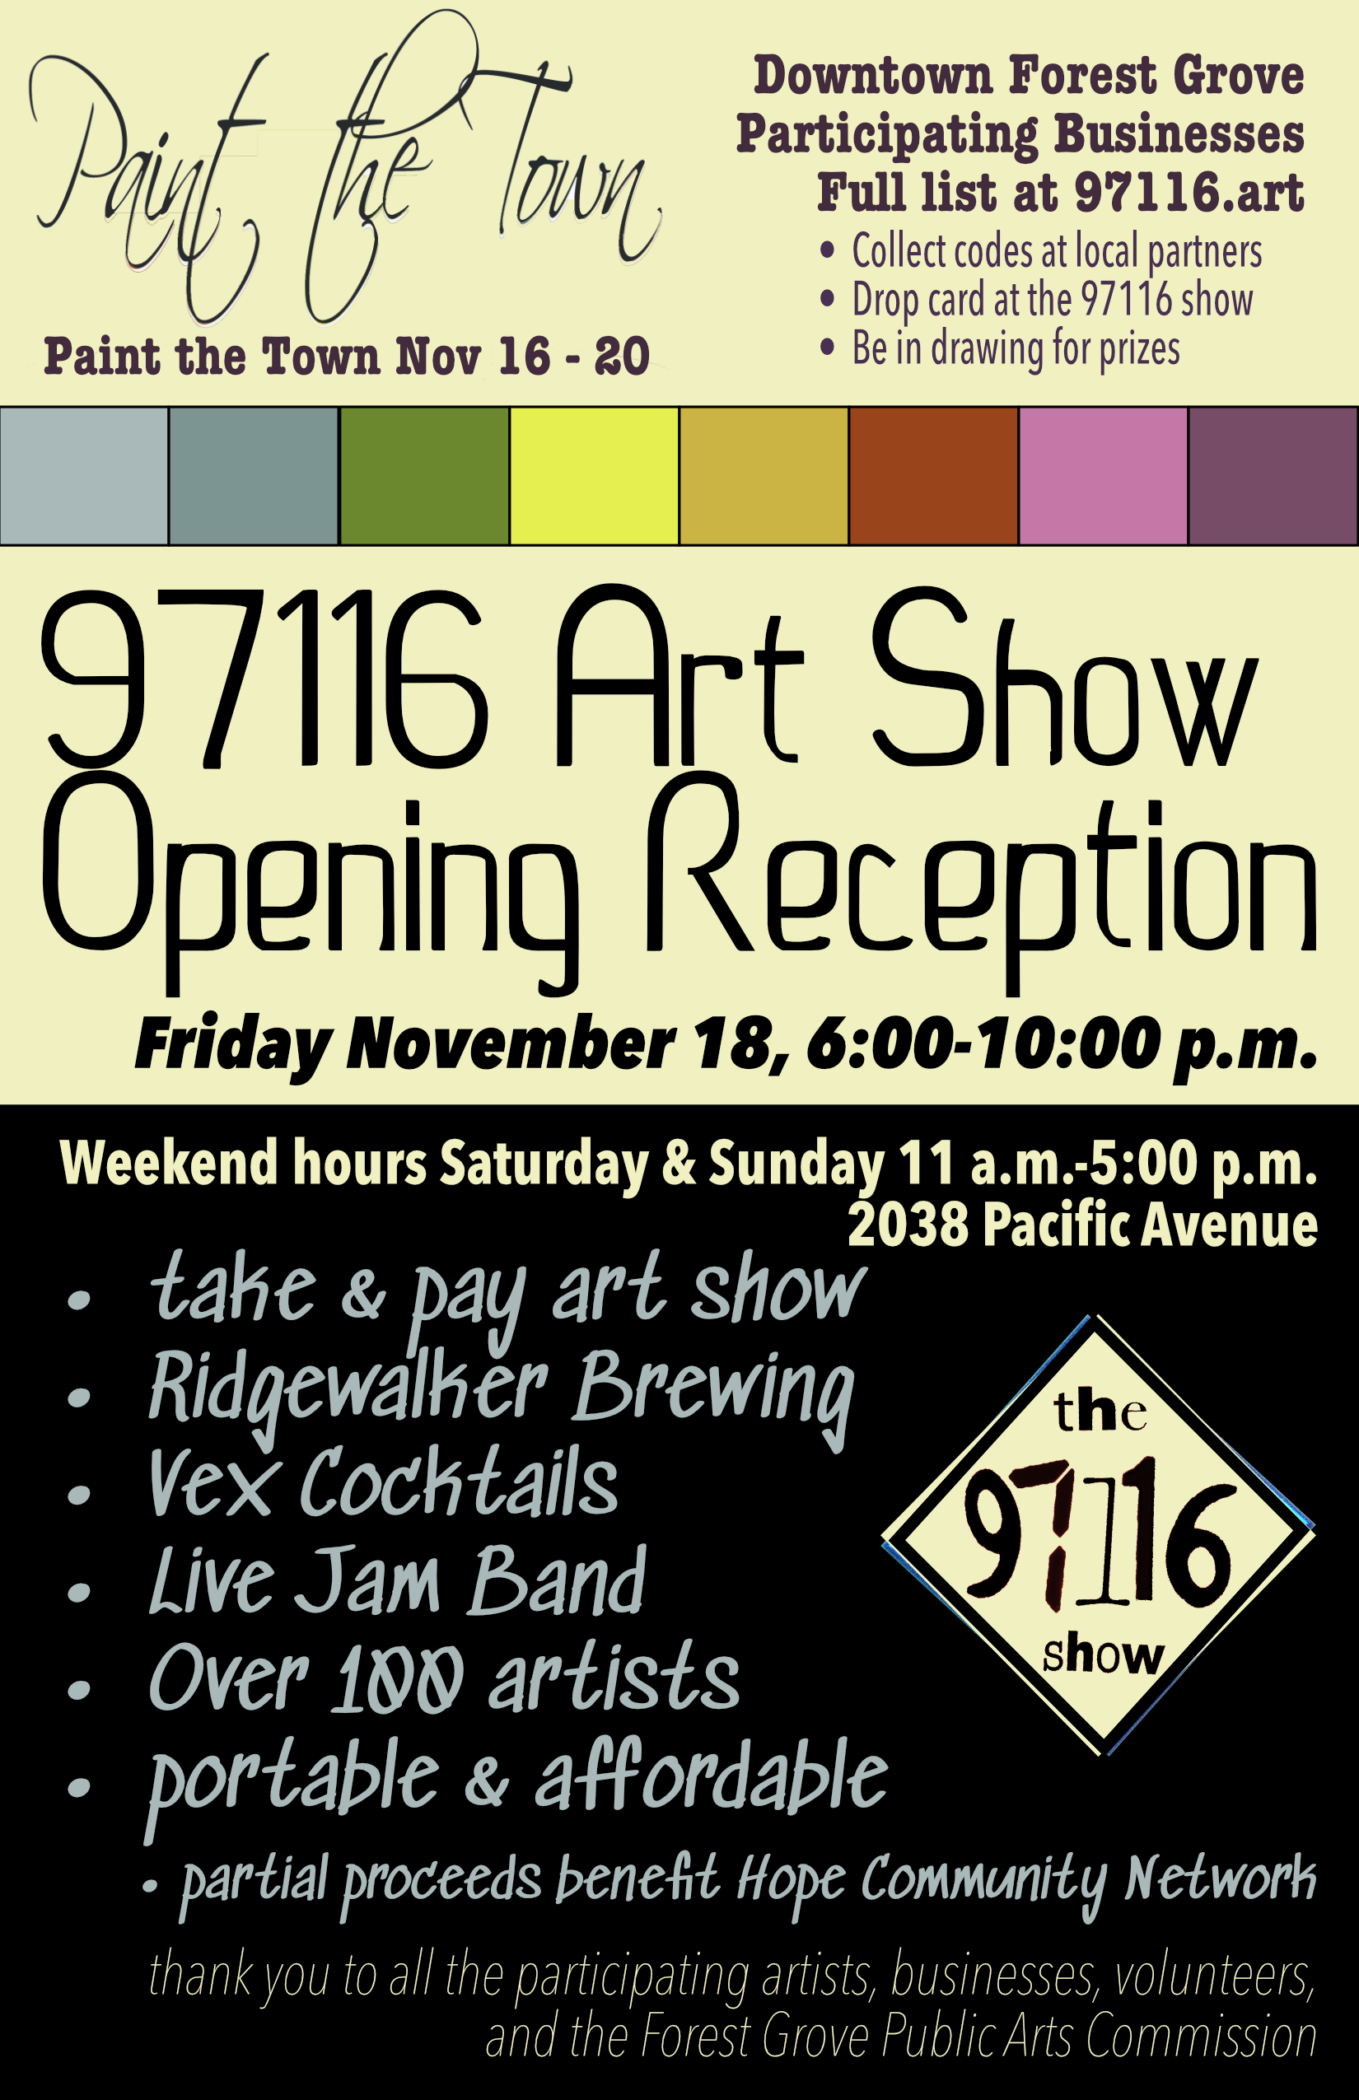 97116 Art Show 2022 Opening Reception Friday Nov 18, 6-10PM. Paint the Town runs from Nov 16-20